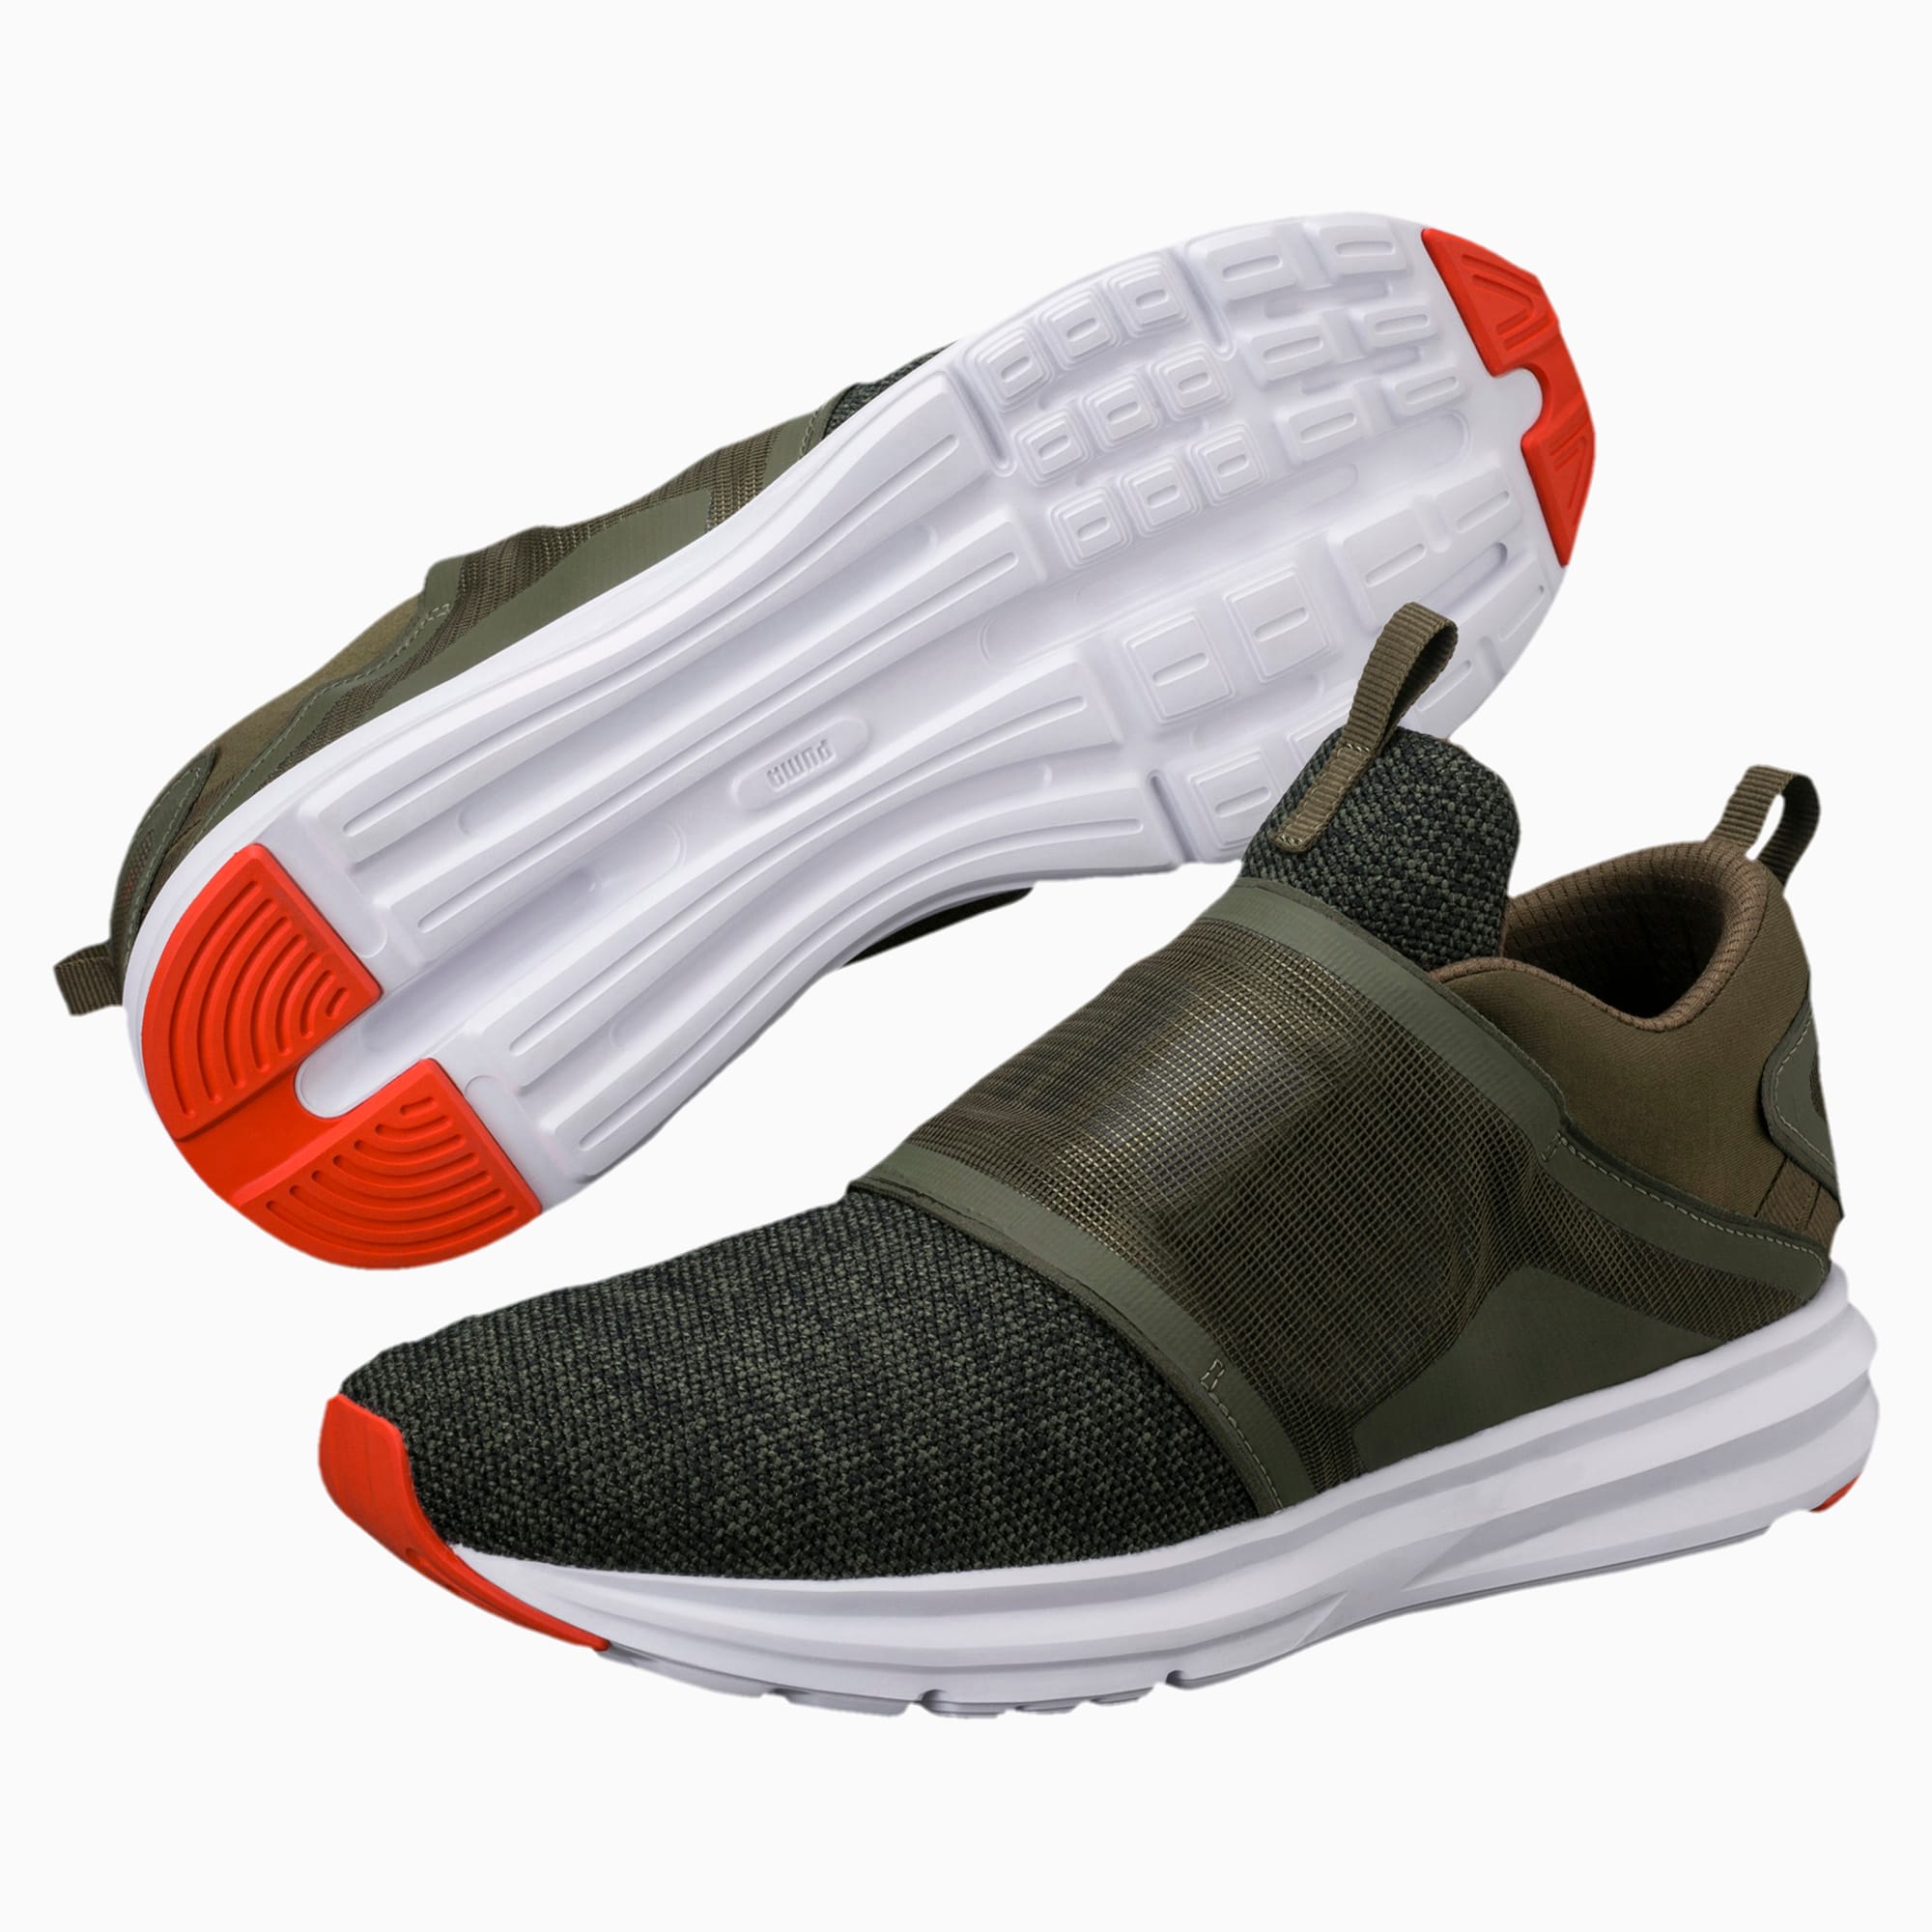 Enzo Strap Knit Men's Running Shoes 